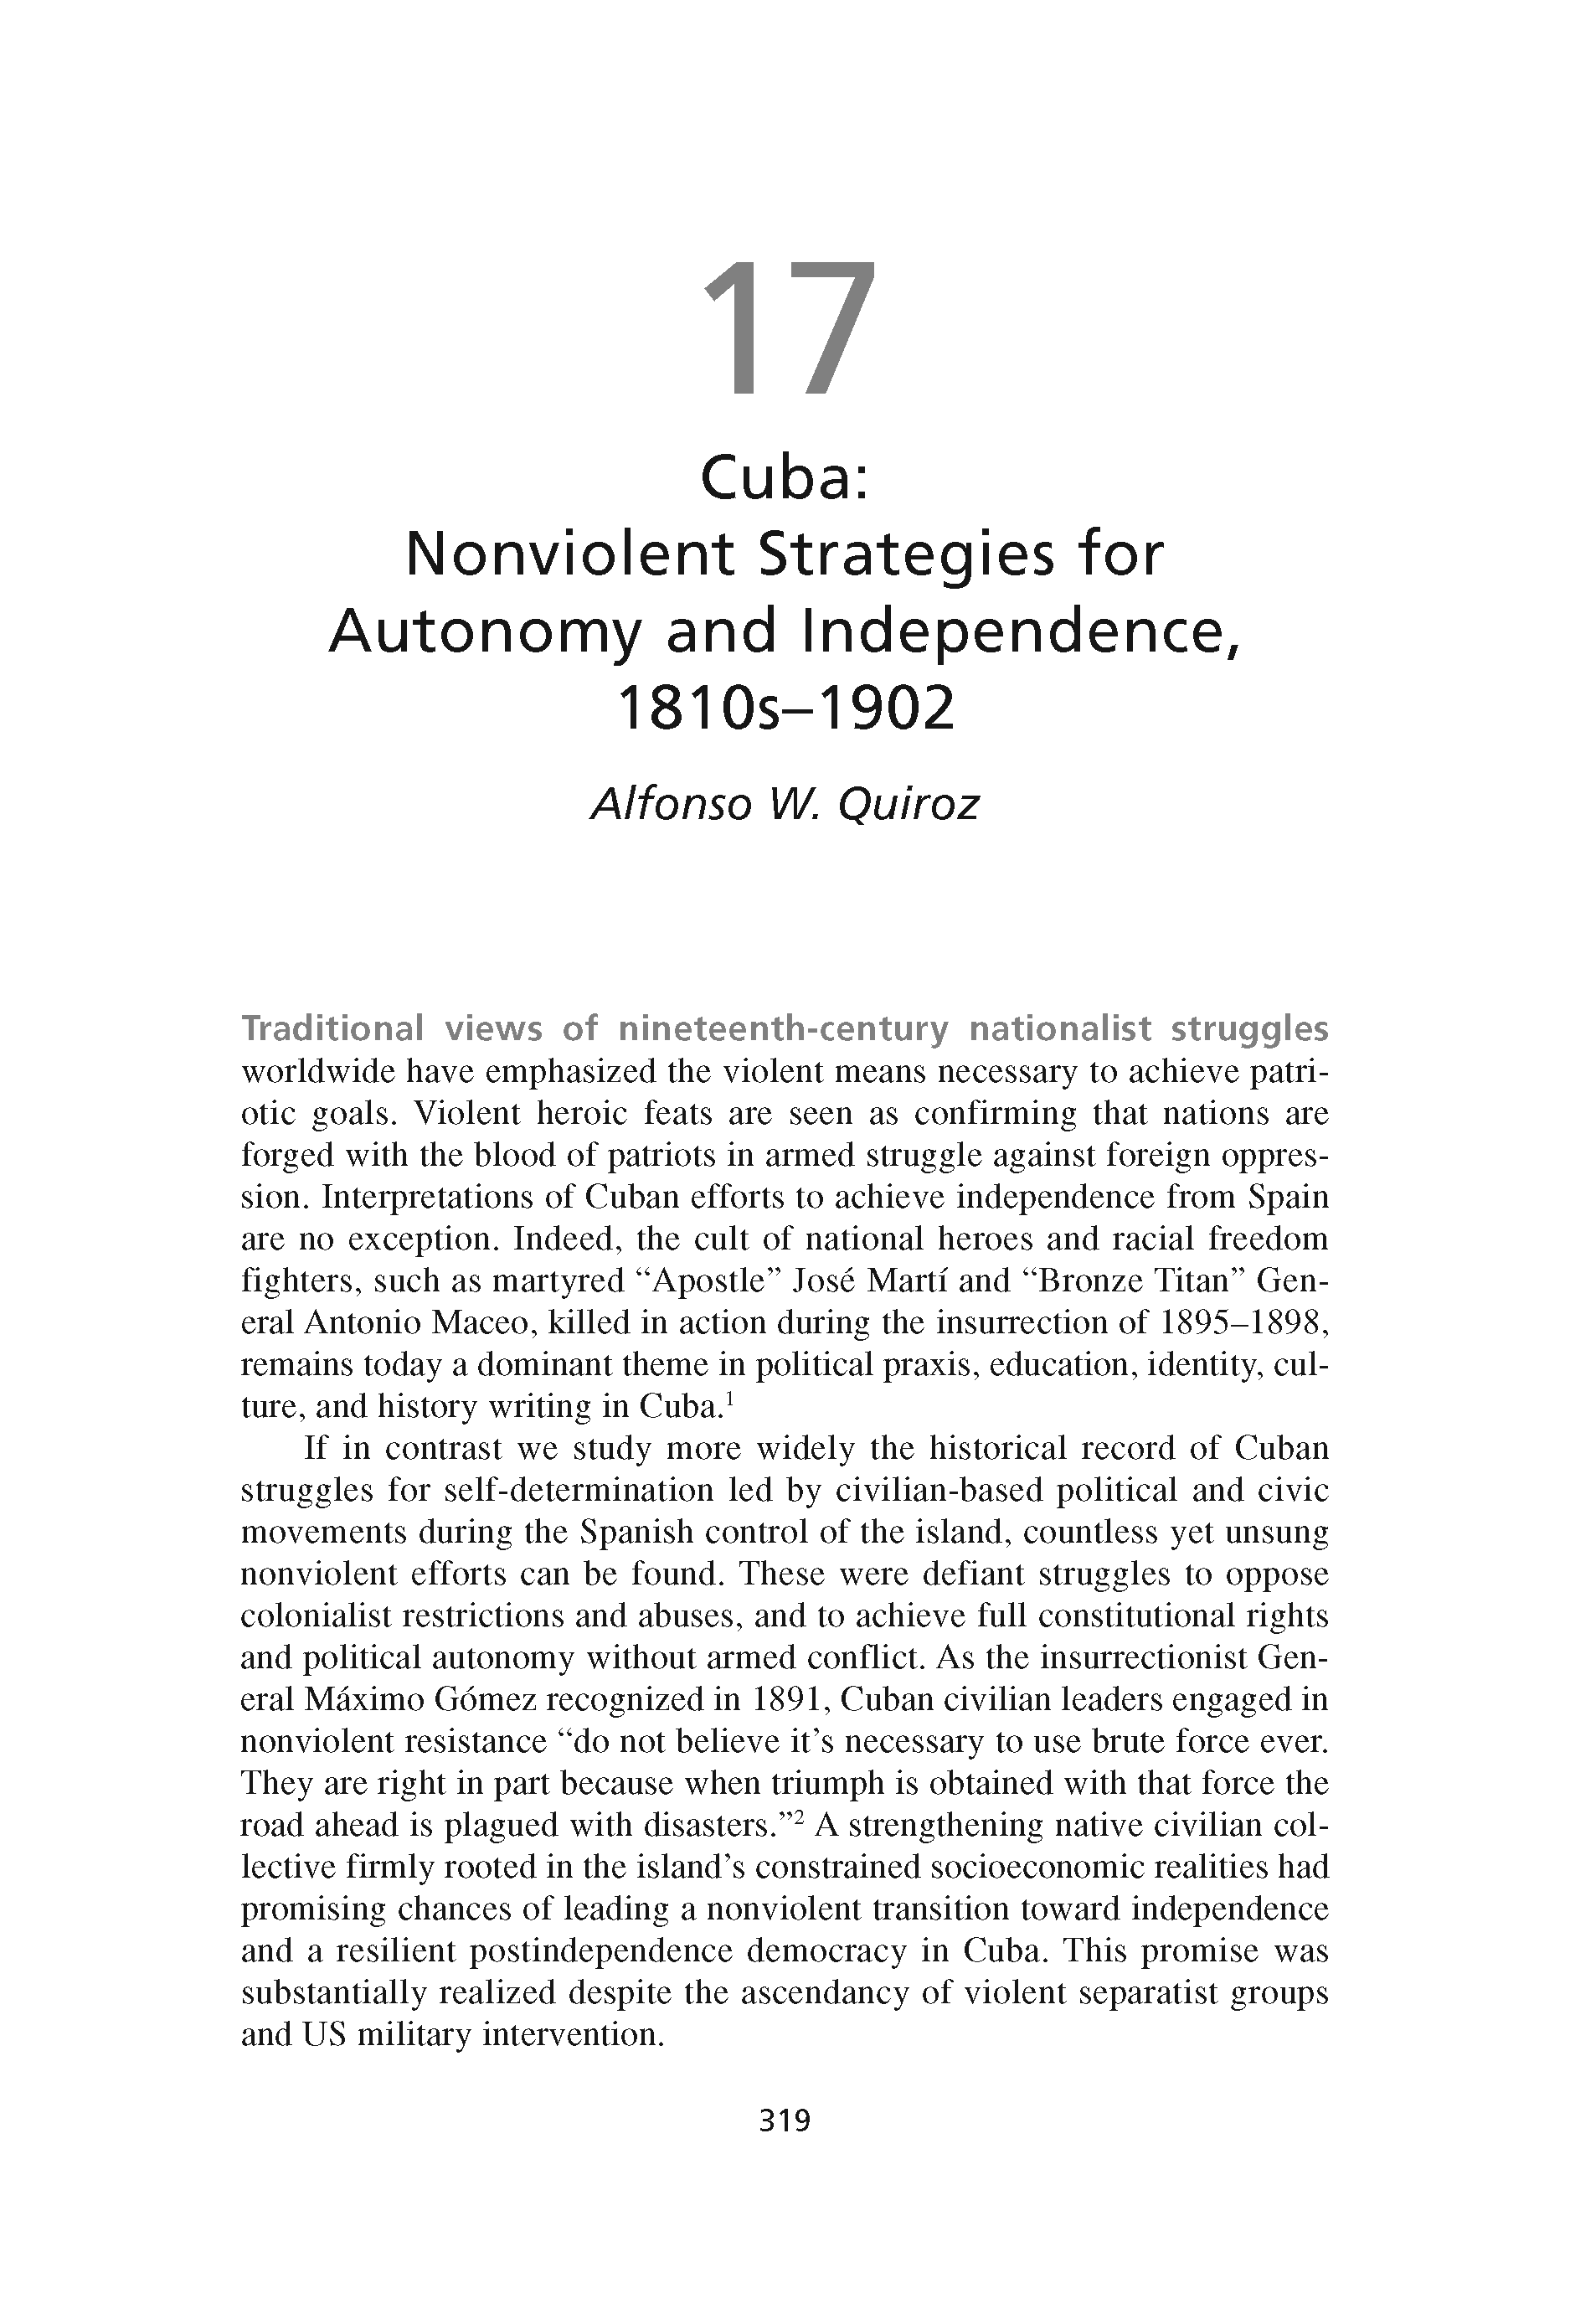 Cuba: Nonviolent Strategies for Autonomy and Independence, 1810s-1902 (Chapter 17 from ‘Recovering Nonviolent History’)